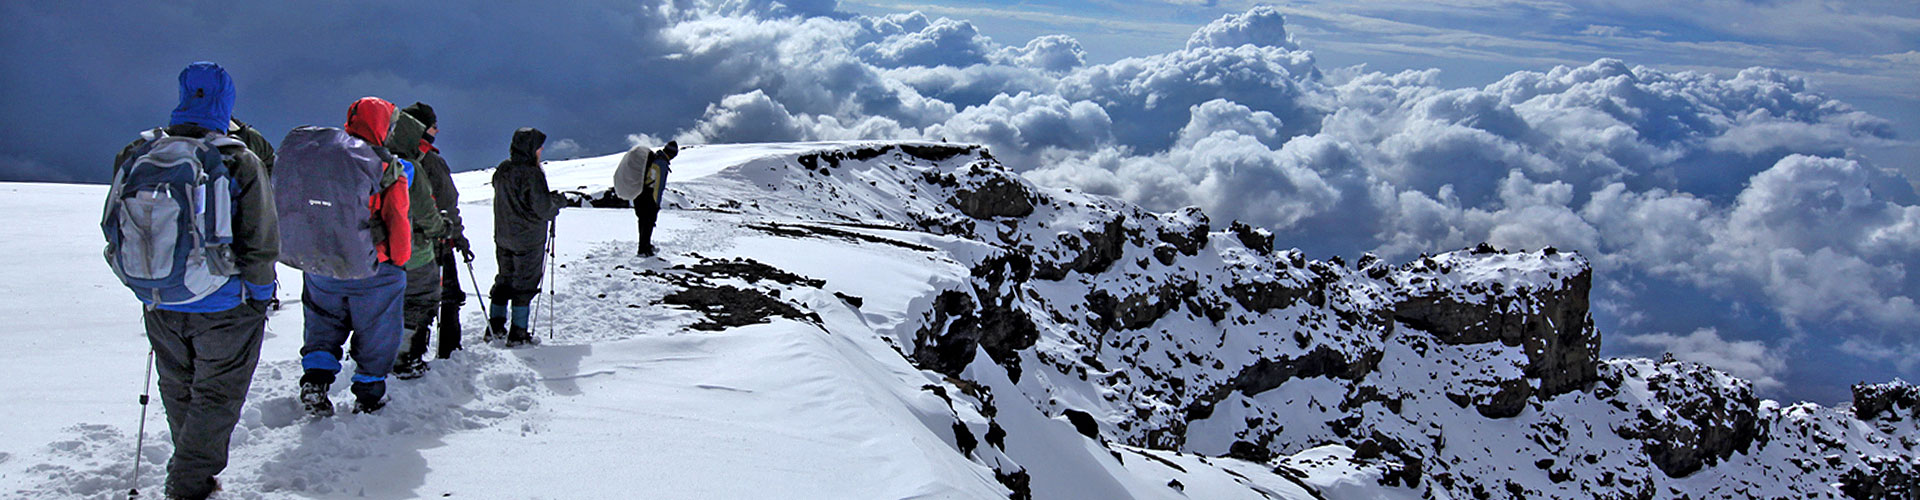 Trekkers take a snowy trail towards the clouds